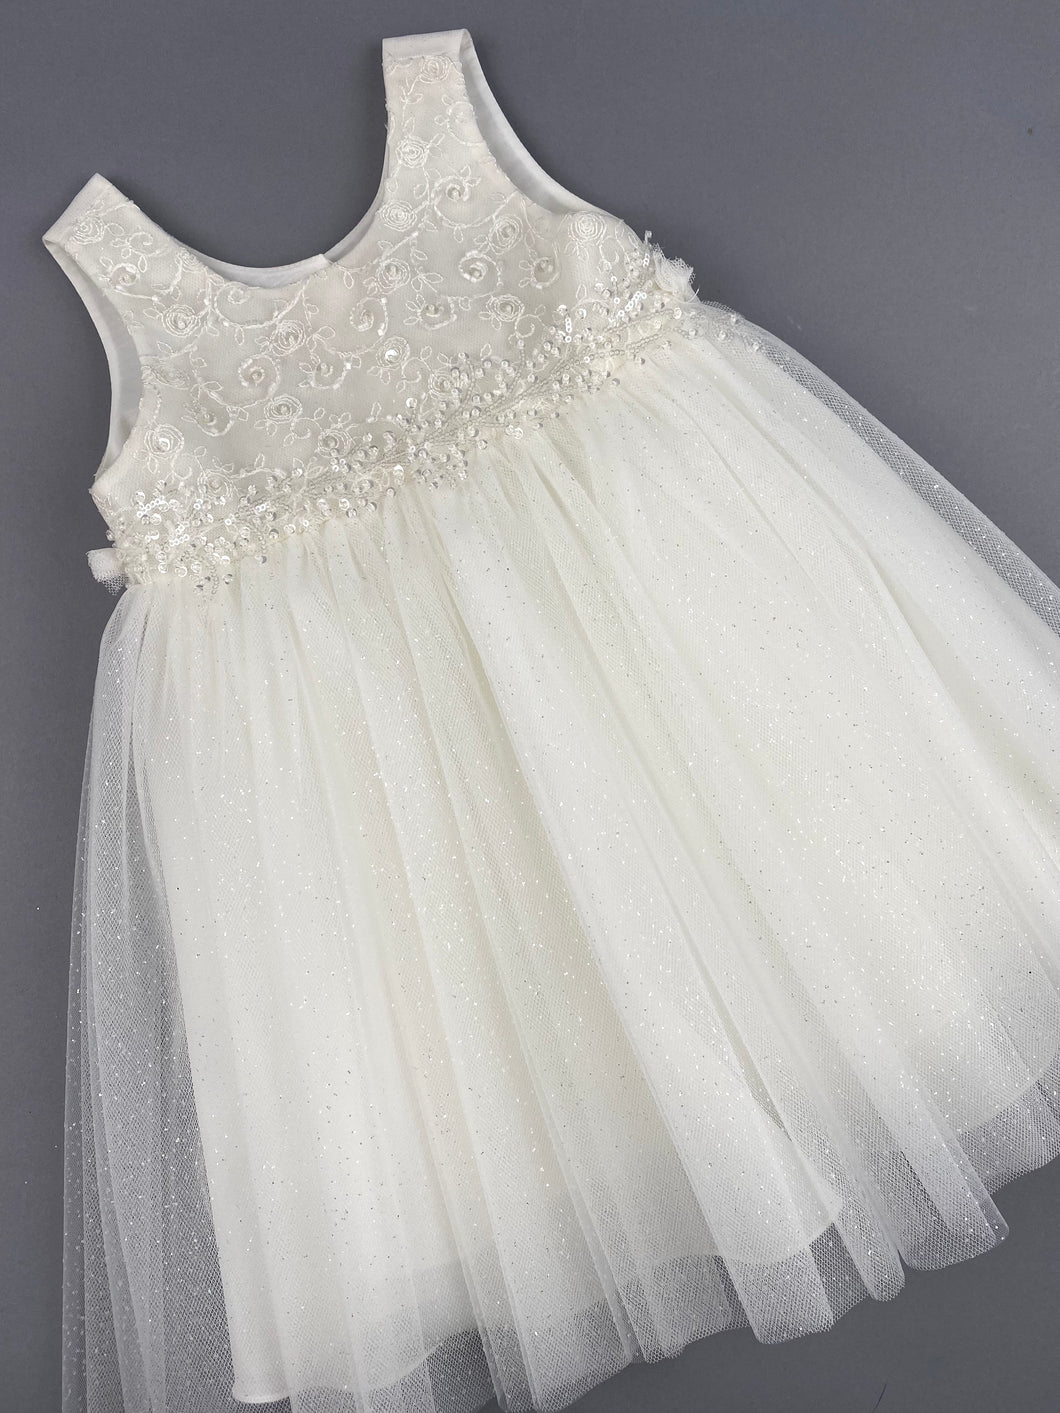 Dress 55 Girls Baptismal Christening Sleeveless Dress with new Silver Glitter, French lace across the chest, accented with Pearl flowers, matching Bolero and Hat. Made in Greece exclusively for Rosies Collections.